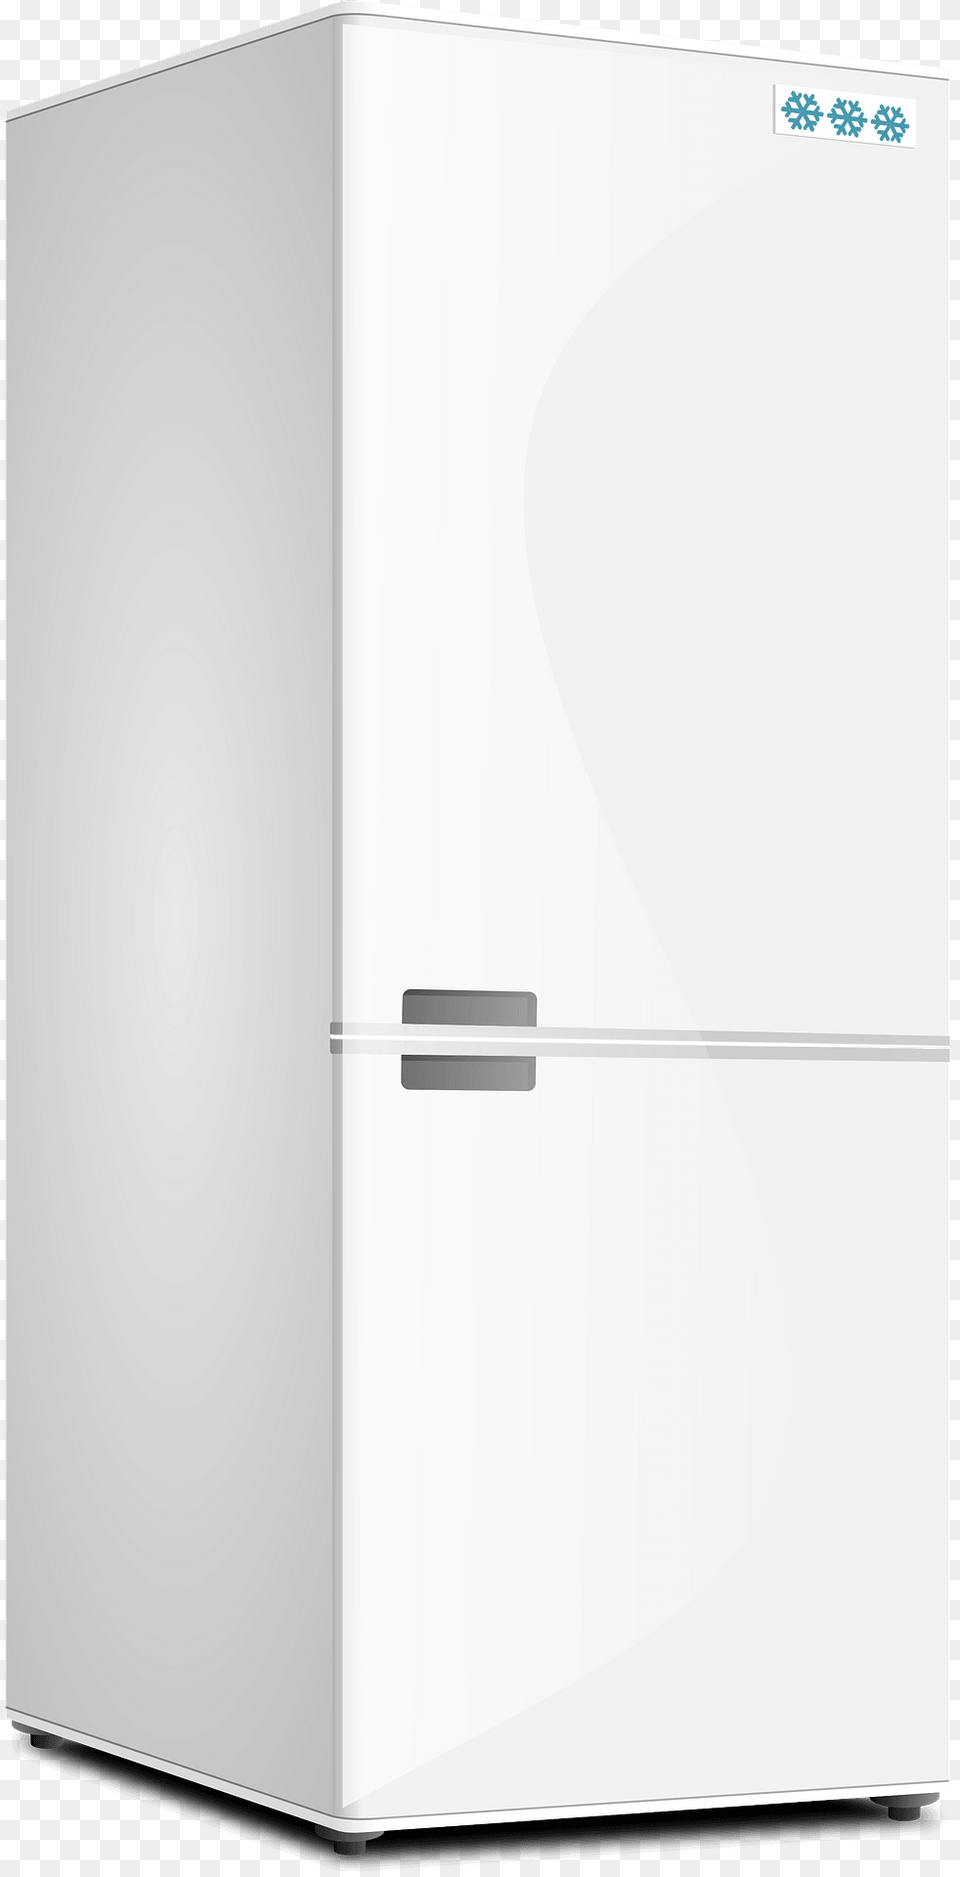 Fridge Clipart, Appliance, Device, Electrical Device, White Board Png